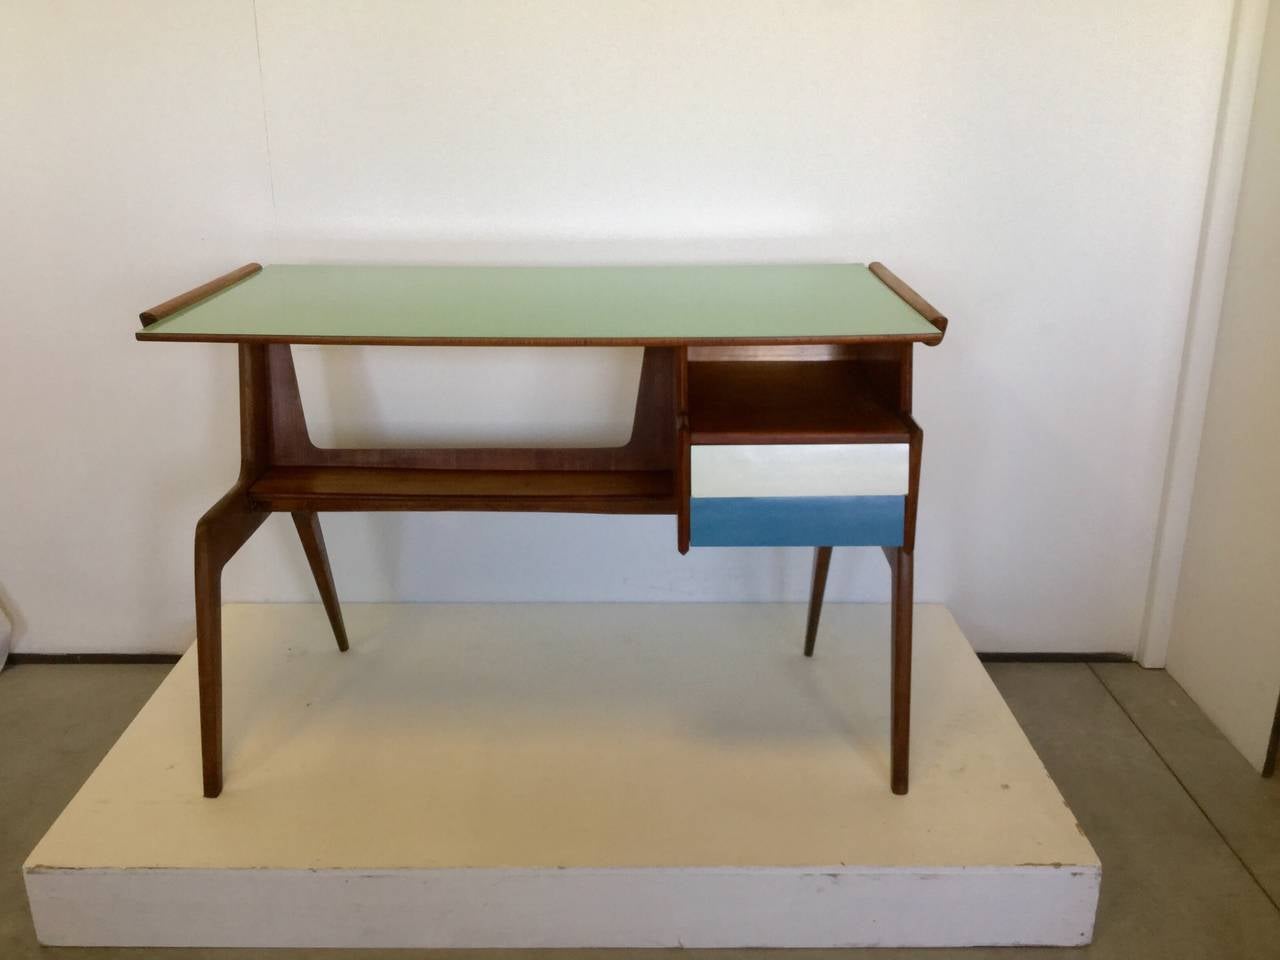 Beautiful desk with top and drawers in colored formica and walnut wood , this model is normally attributed to GIO PONTI and GIordano Chiesa manufacturer , the shape is very closed to PONTI style and also the colors belong to its own repertory